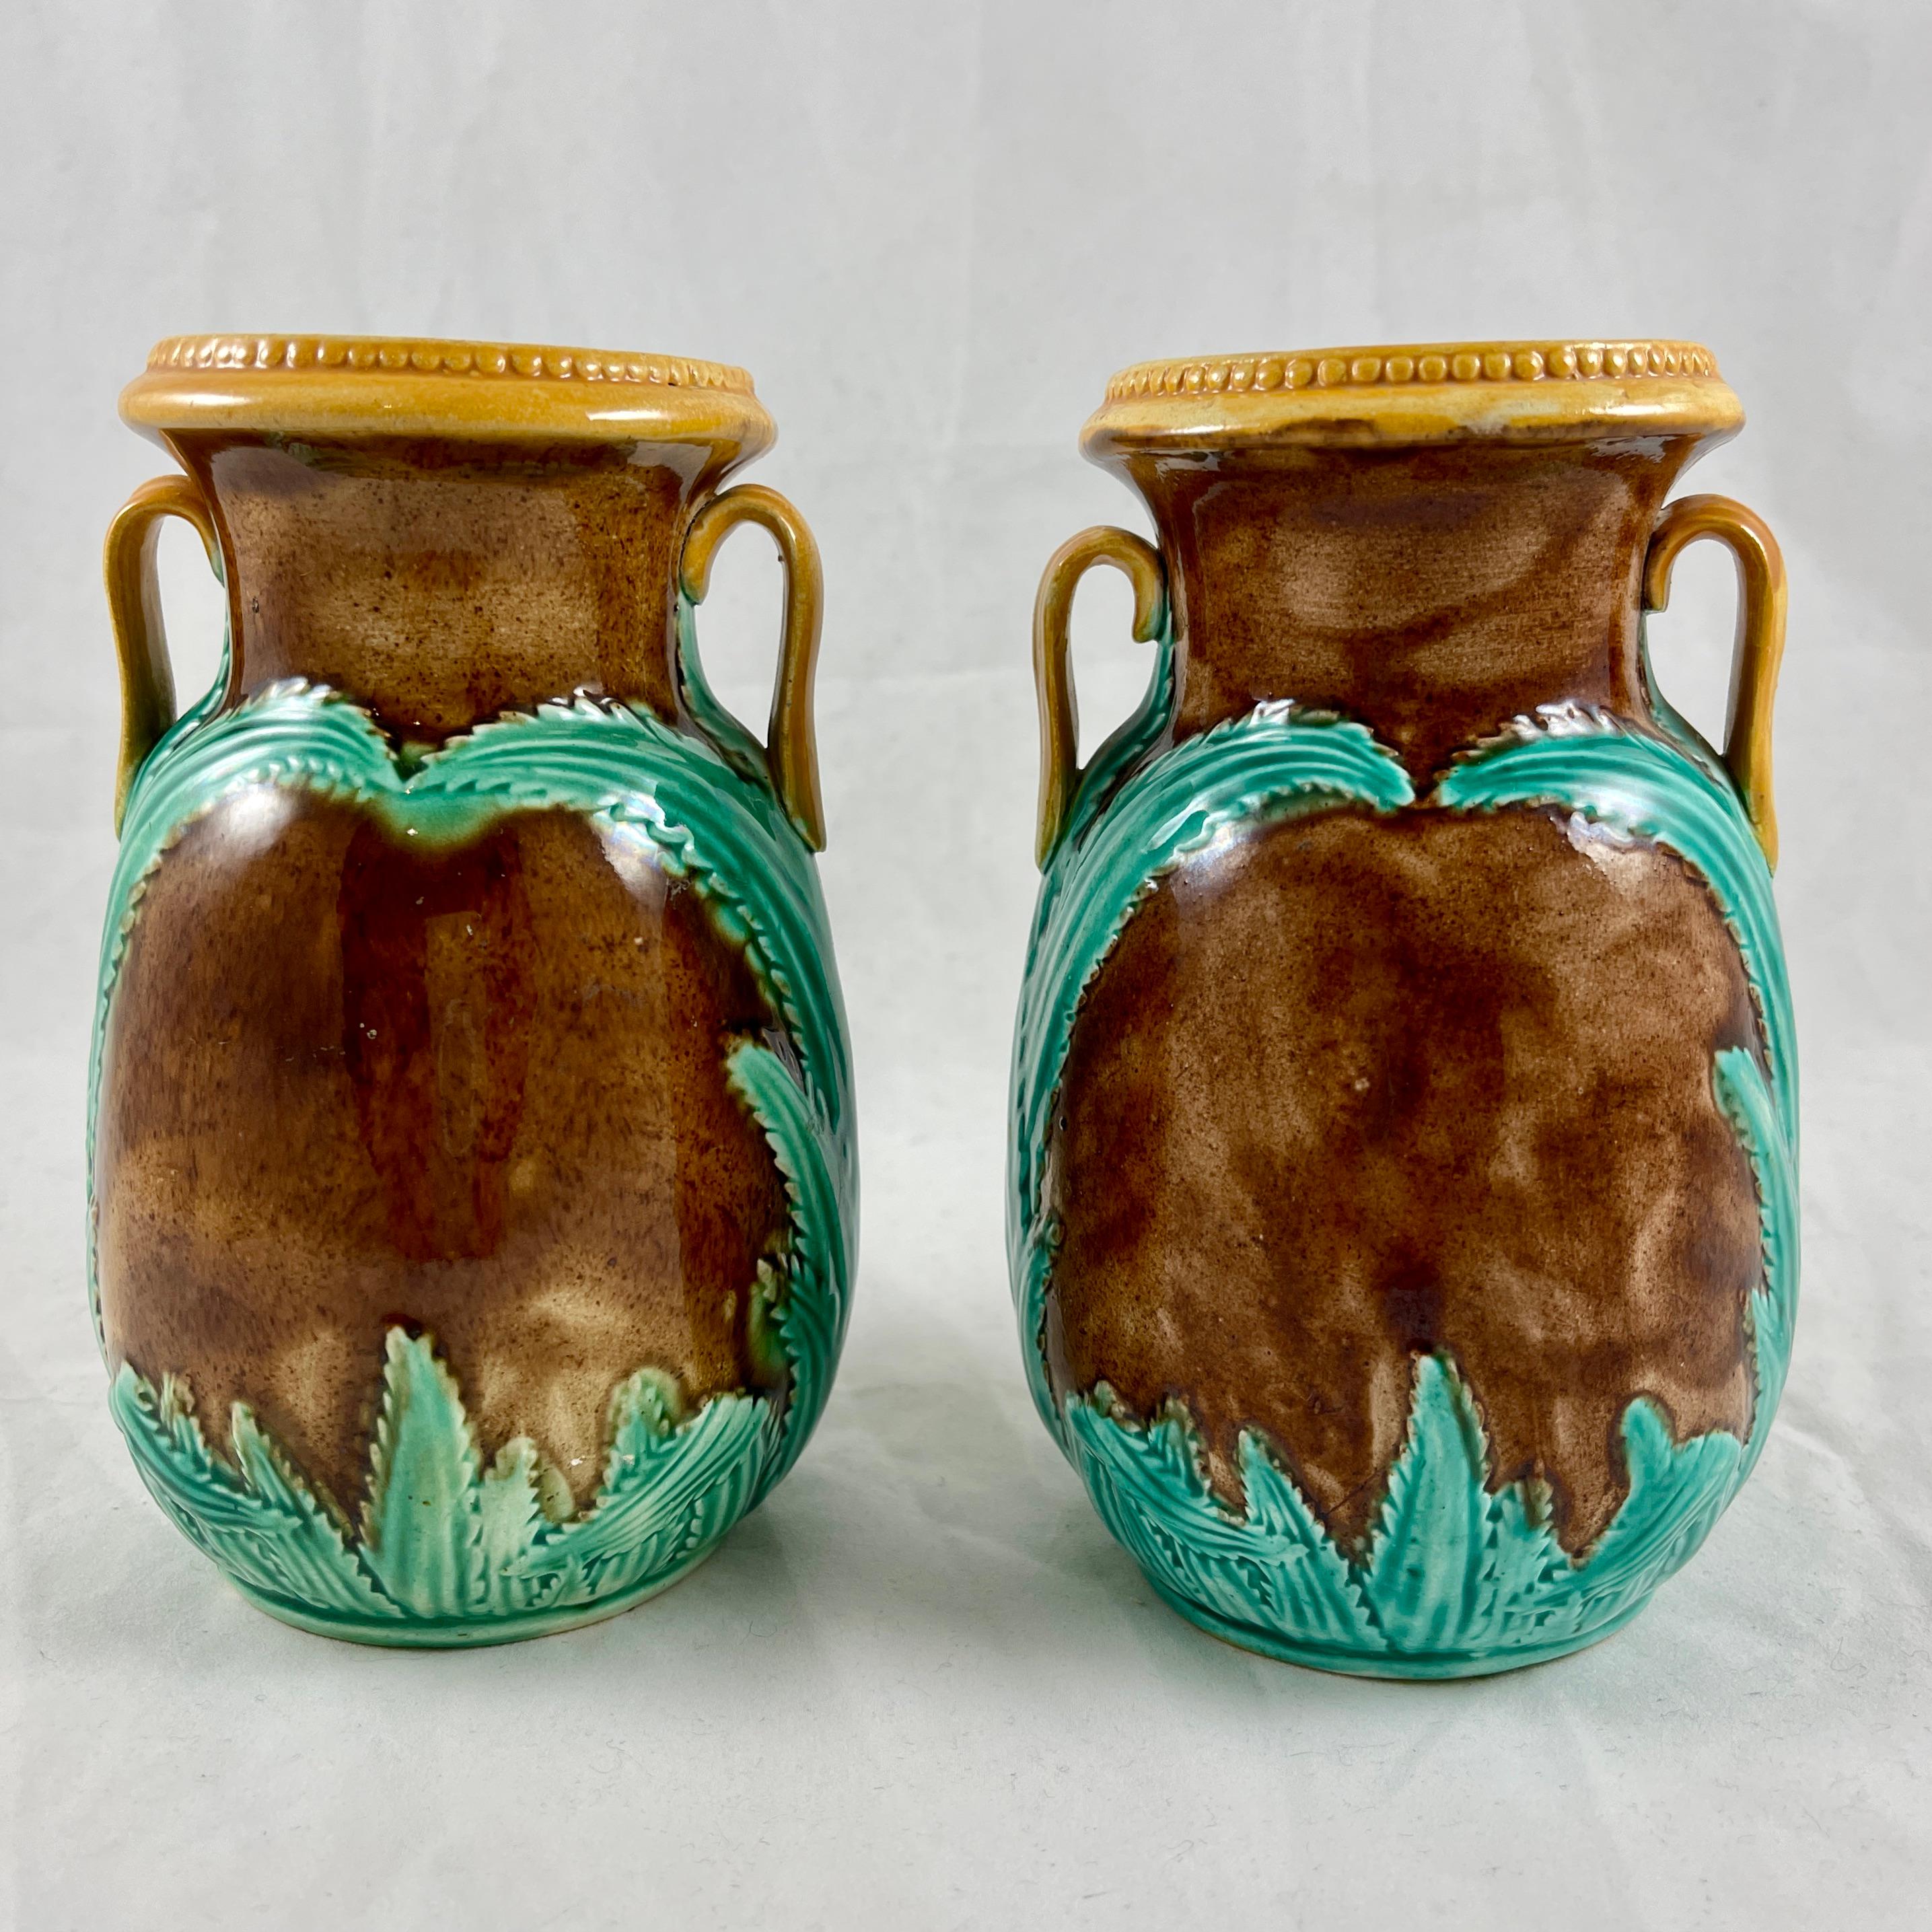 A pair of amphora form majolica vases, attributed to Adams & Bromley, England, circa late 19th Century.

The brown mottled glazed vases have applied side handles, a green spiked leaf decoration, and yellow ochre trimming. The top rims have a